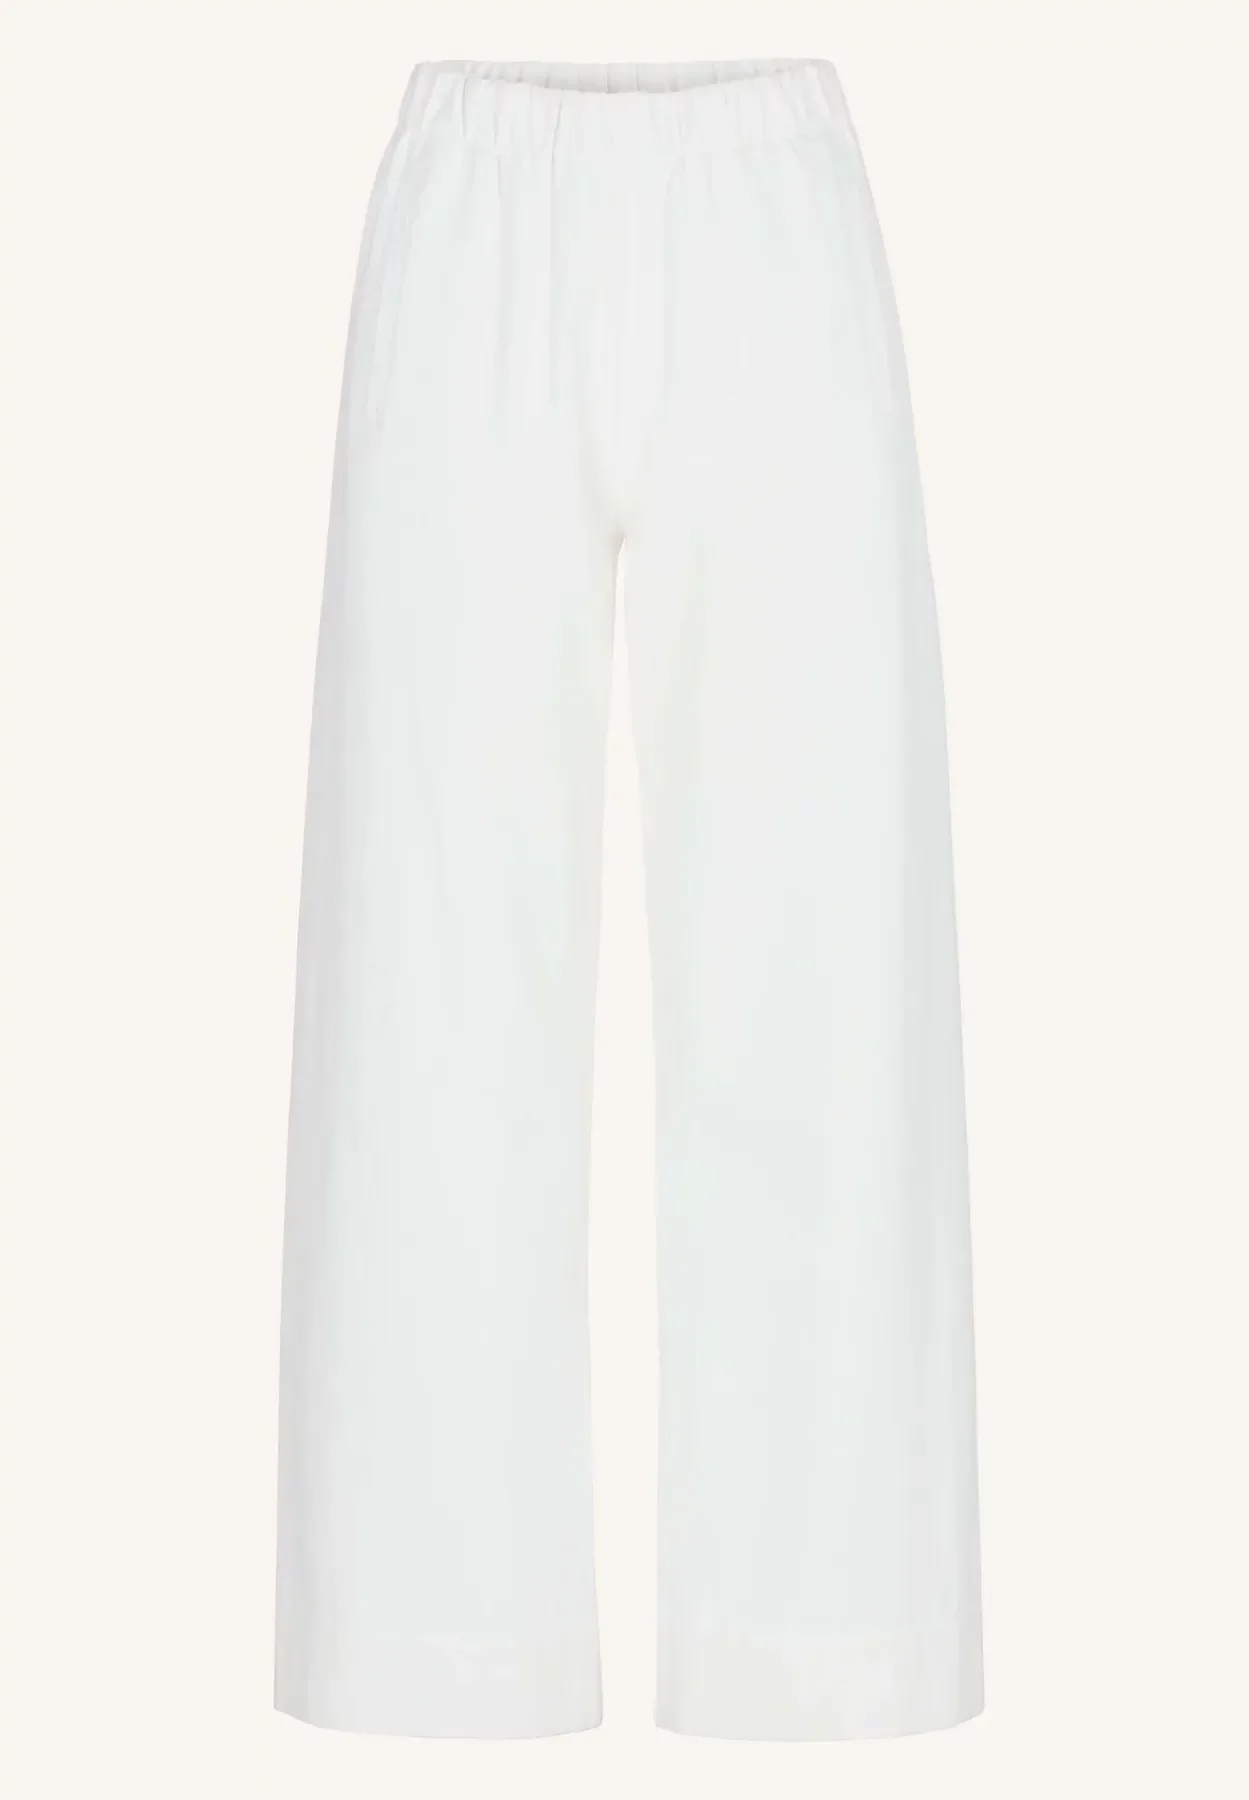 by-bar amsterdam - mees twill pant - off white 4